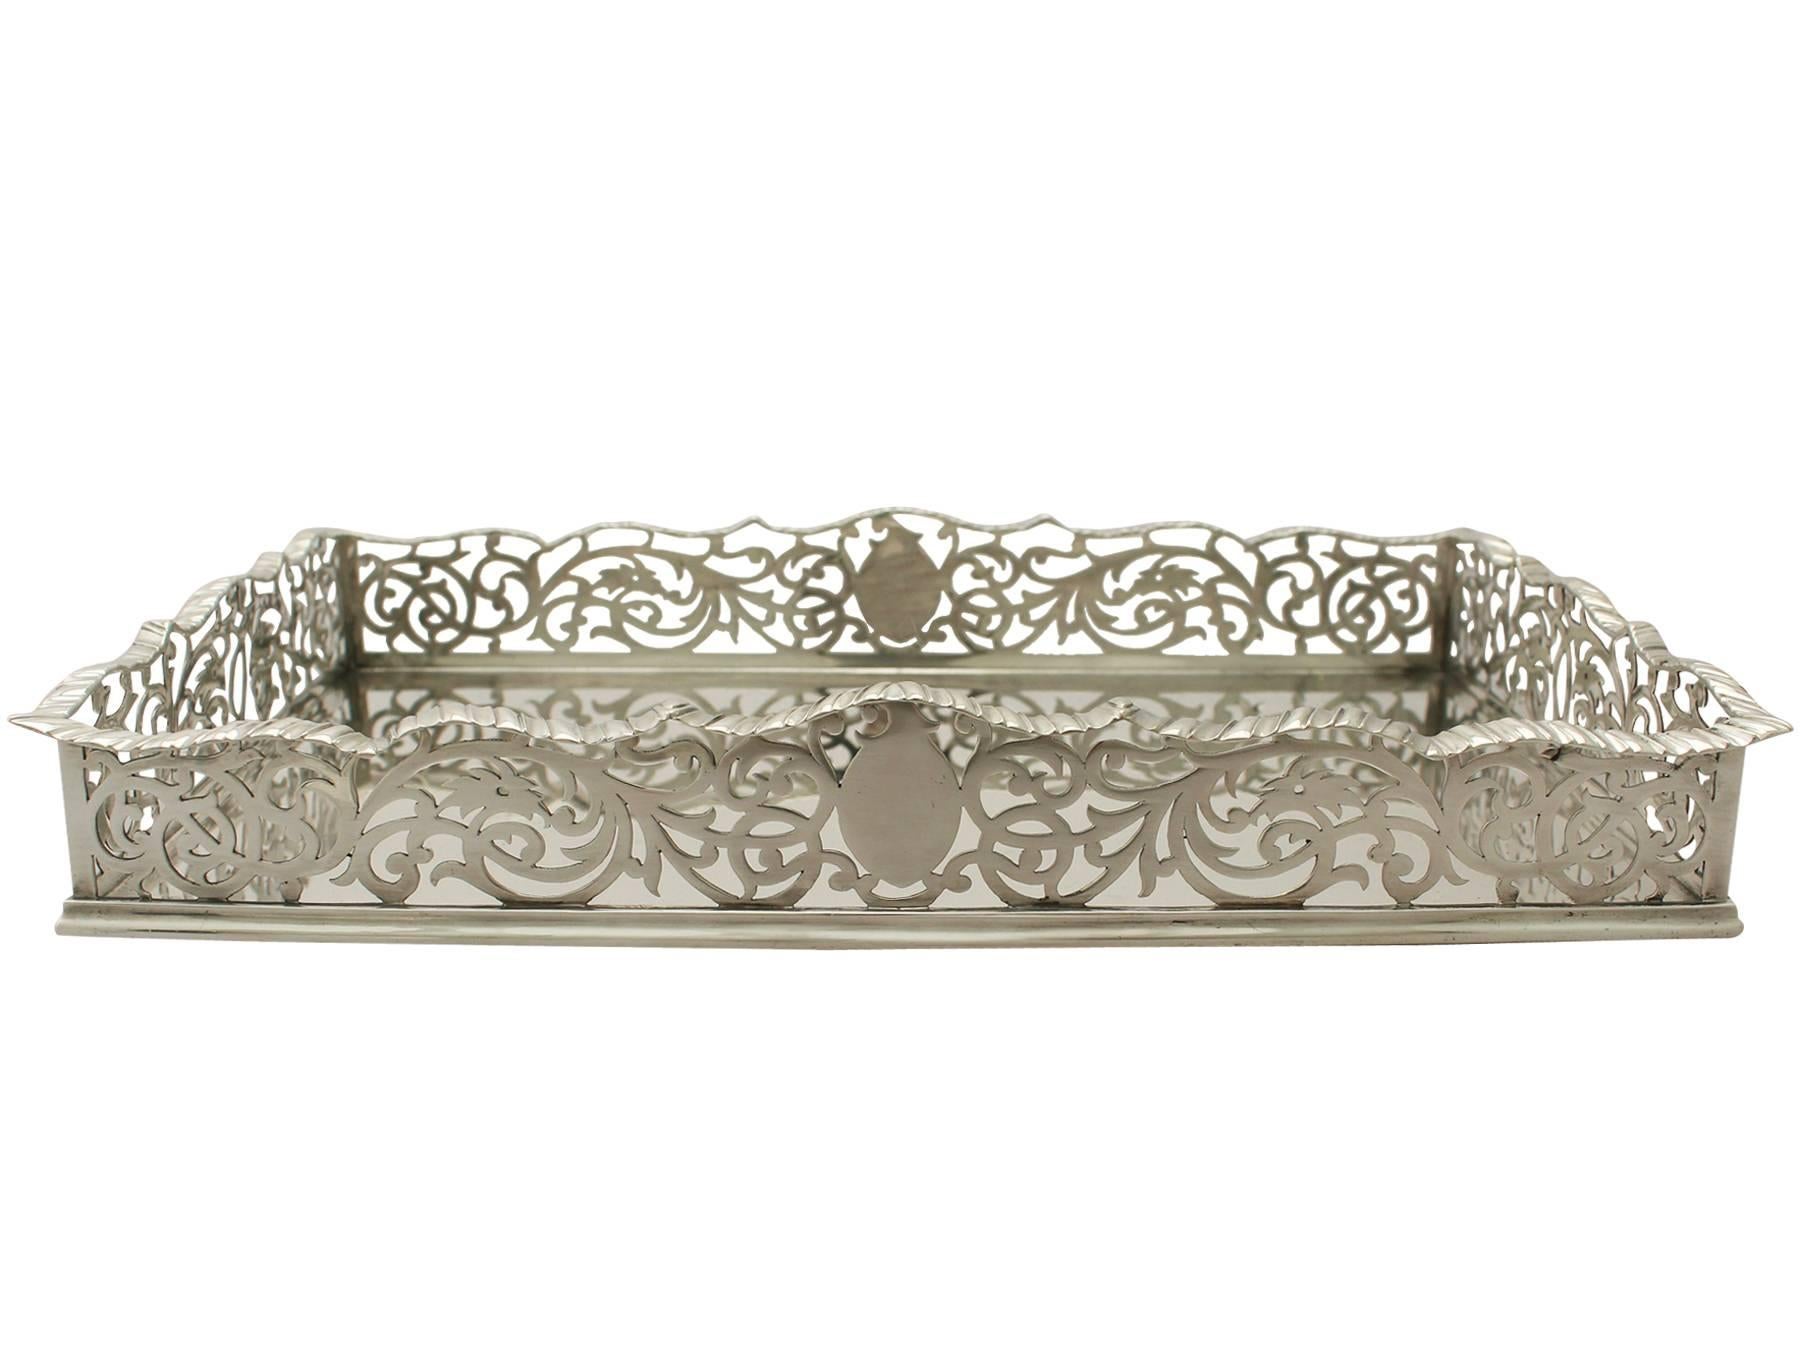 An exceptional, fine and impressive antique Edwardian English sterling silver gallery tray/salver; an addition to our wine and drinks related silverware collection.

This exceptional antique Edwardian sterling silver gallery tray/salver has a